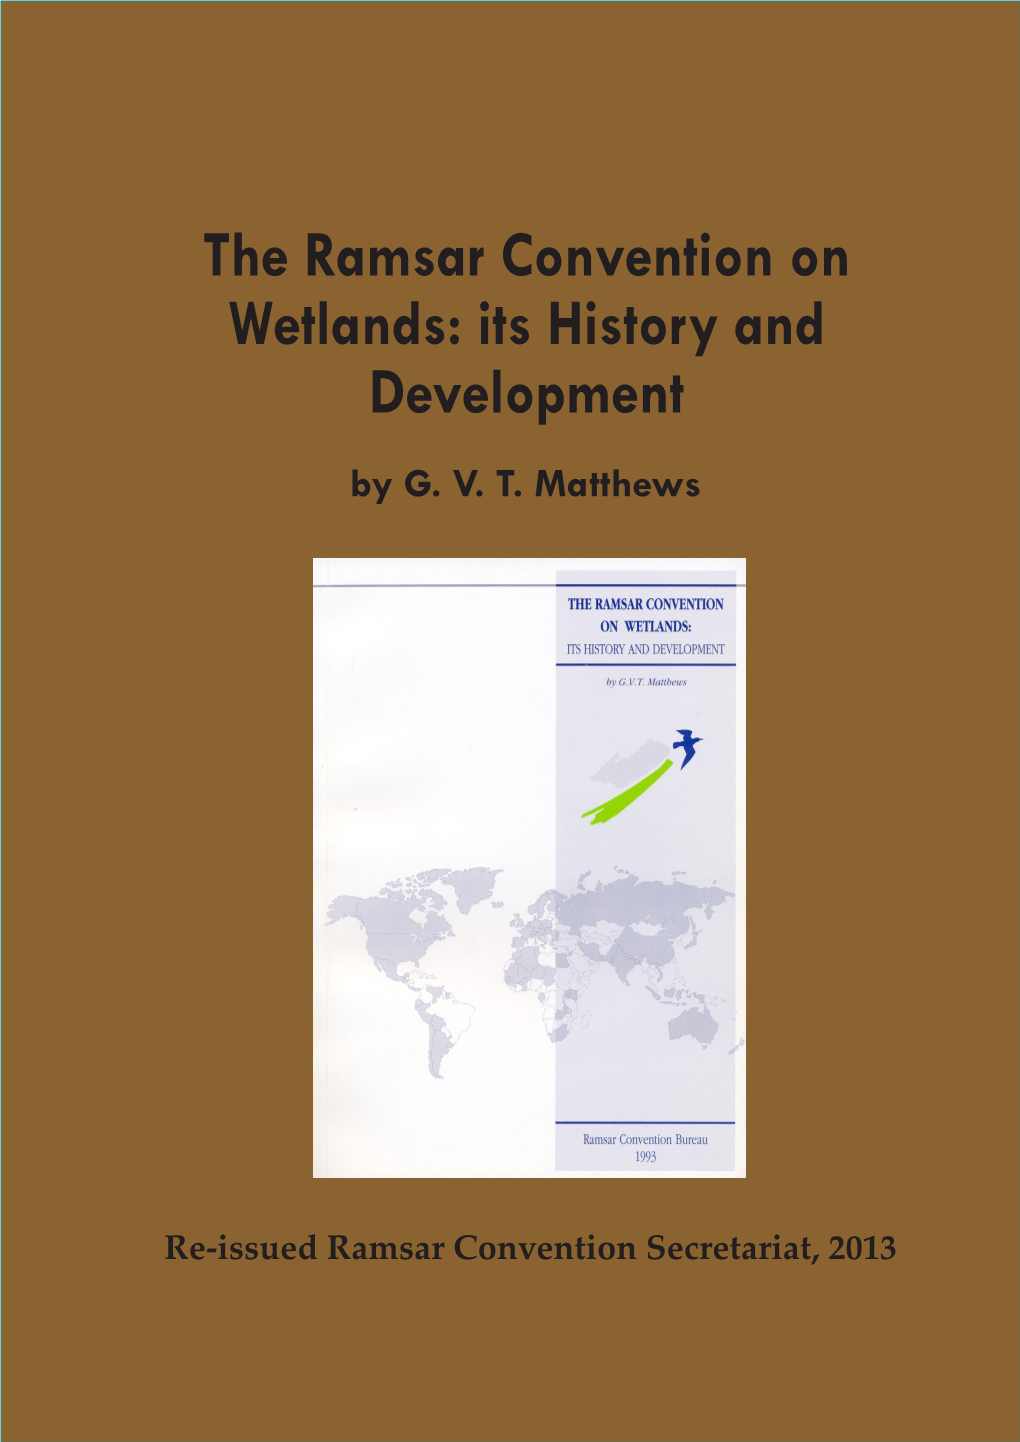 The Ramsar Convention on Wetlands: Its History and Development by G